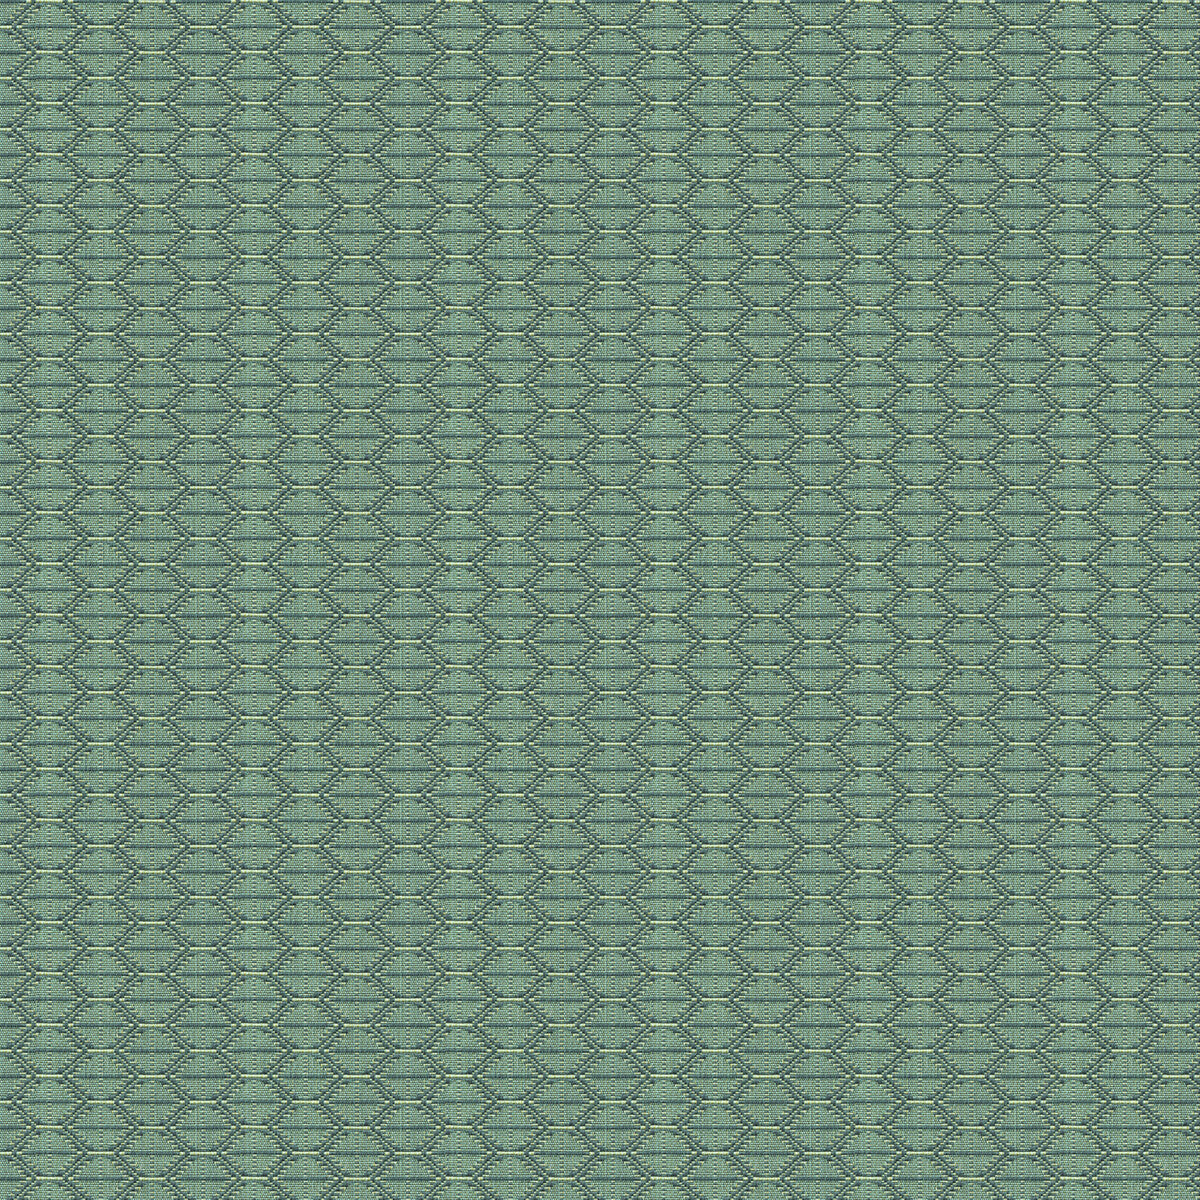 Nzuri fabric in breeze color - pattern 33862.15.0 - by Kravet Contract in the Tanzania J Banks collection